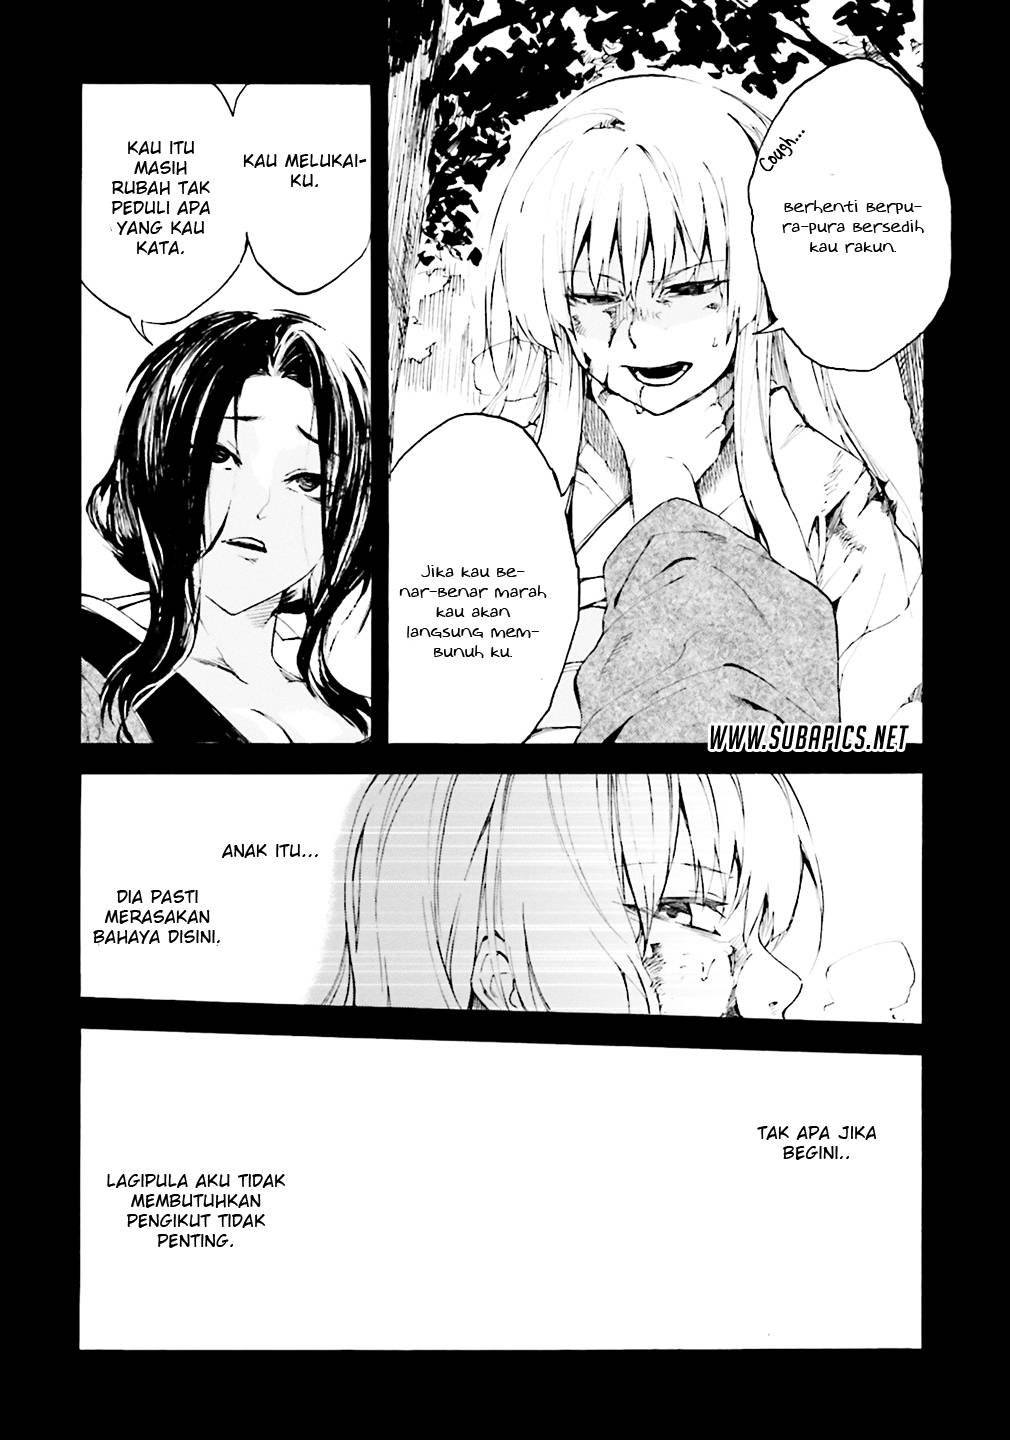 Kuhime Chapter 5